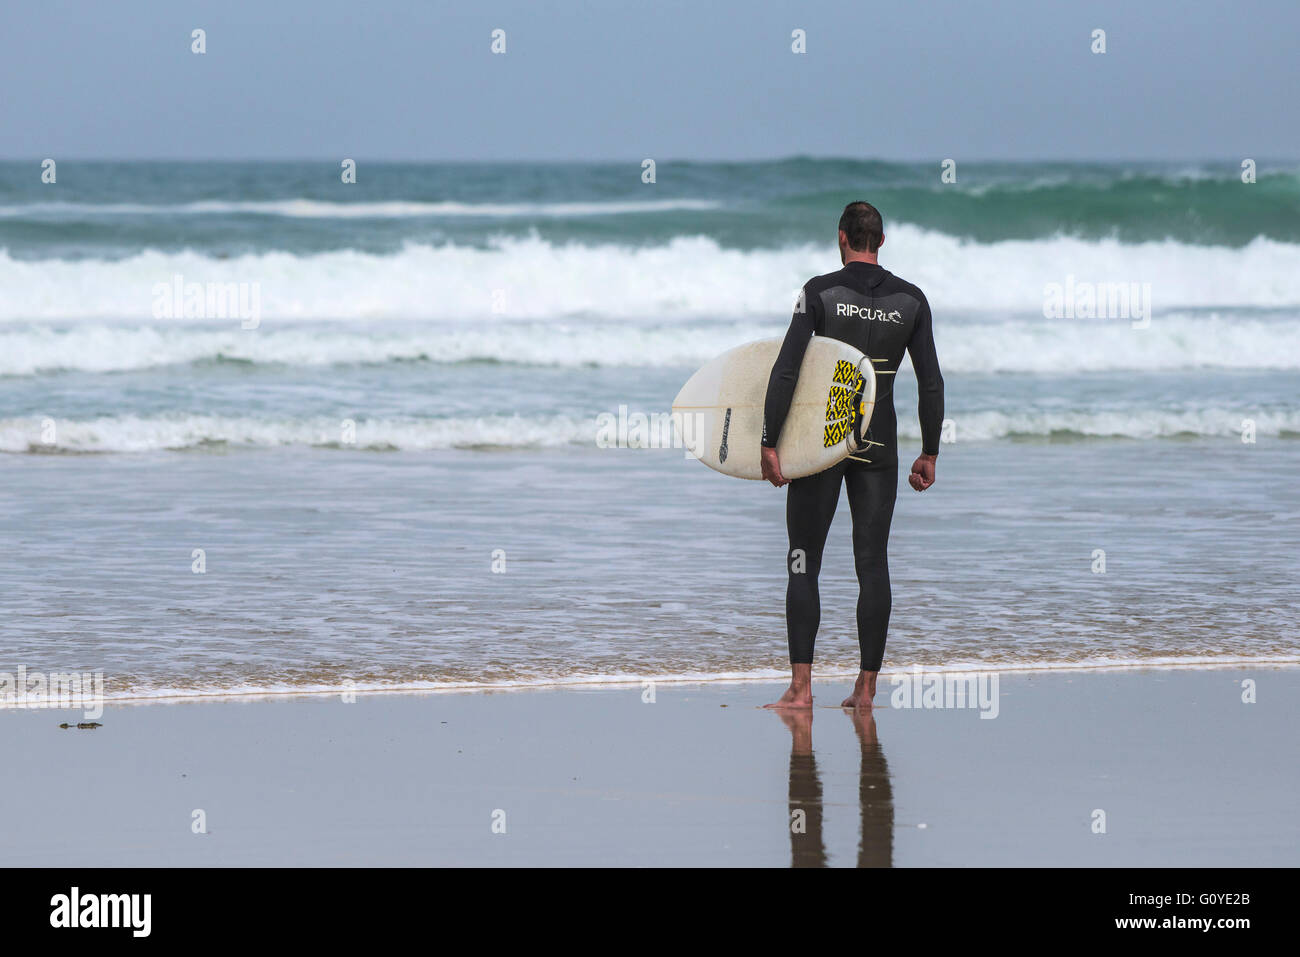 Ein Surfer am Fistral in Newquay, Cornwall. Stockfoto